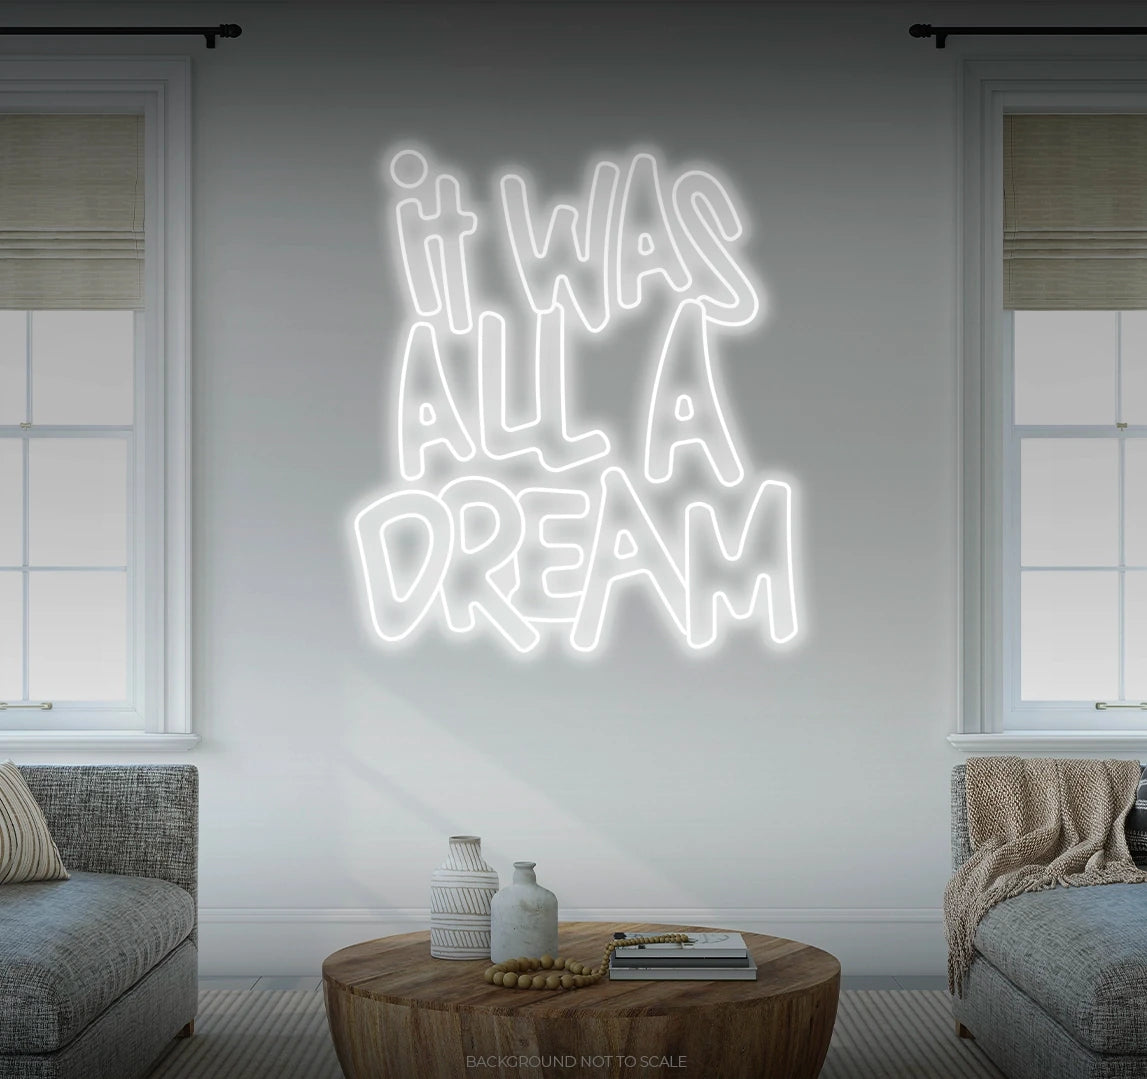 It was all a dream LED neon